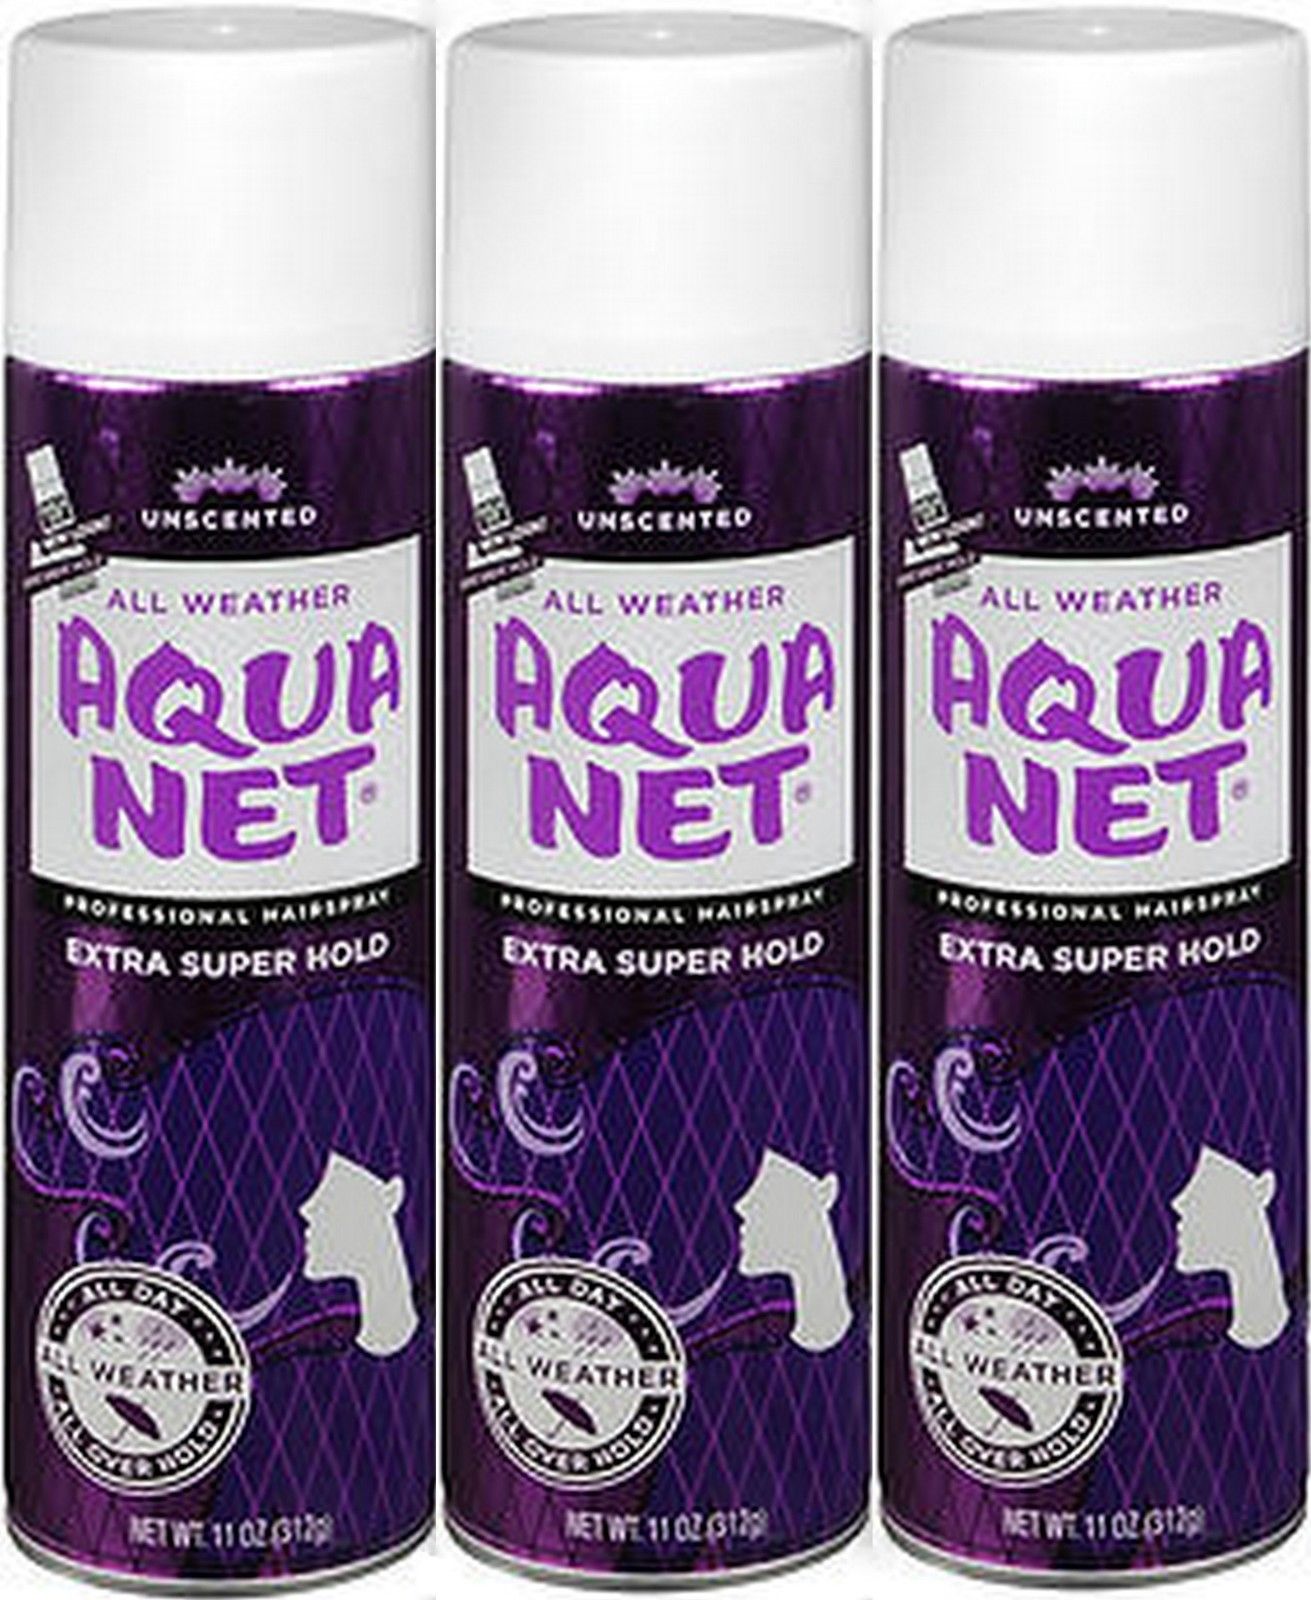  Aqua Net Professional Hair Spray, Extra Super Hold 3, 11 Ounce  : Aquanet Hairspray : Beauty & Personal Care